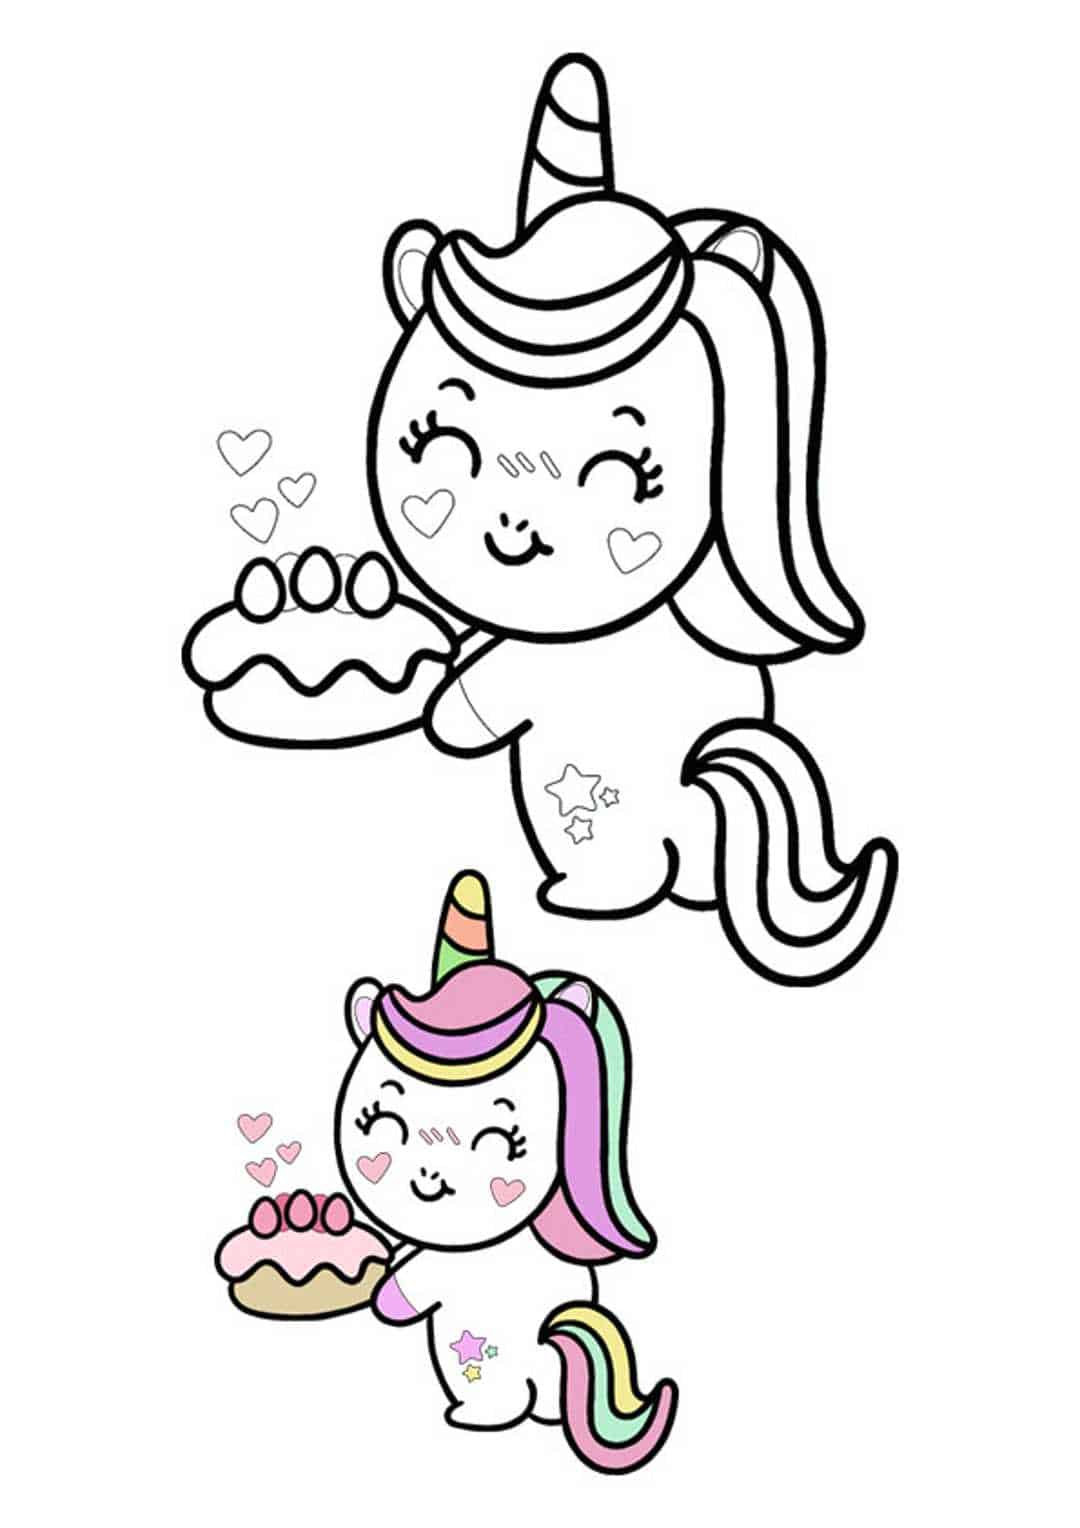 Unicorn Birthday Coloring Pages - 4 Free Printable Coloring Sheets (2020)